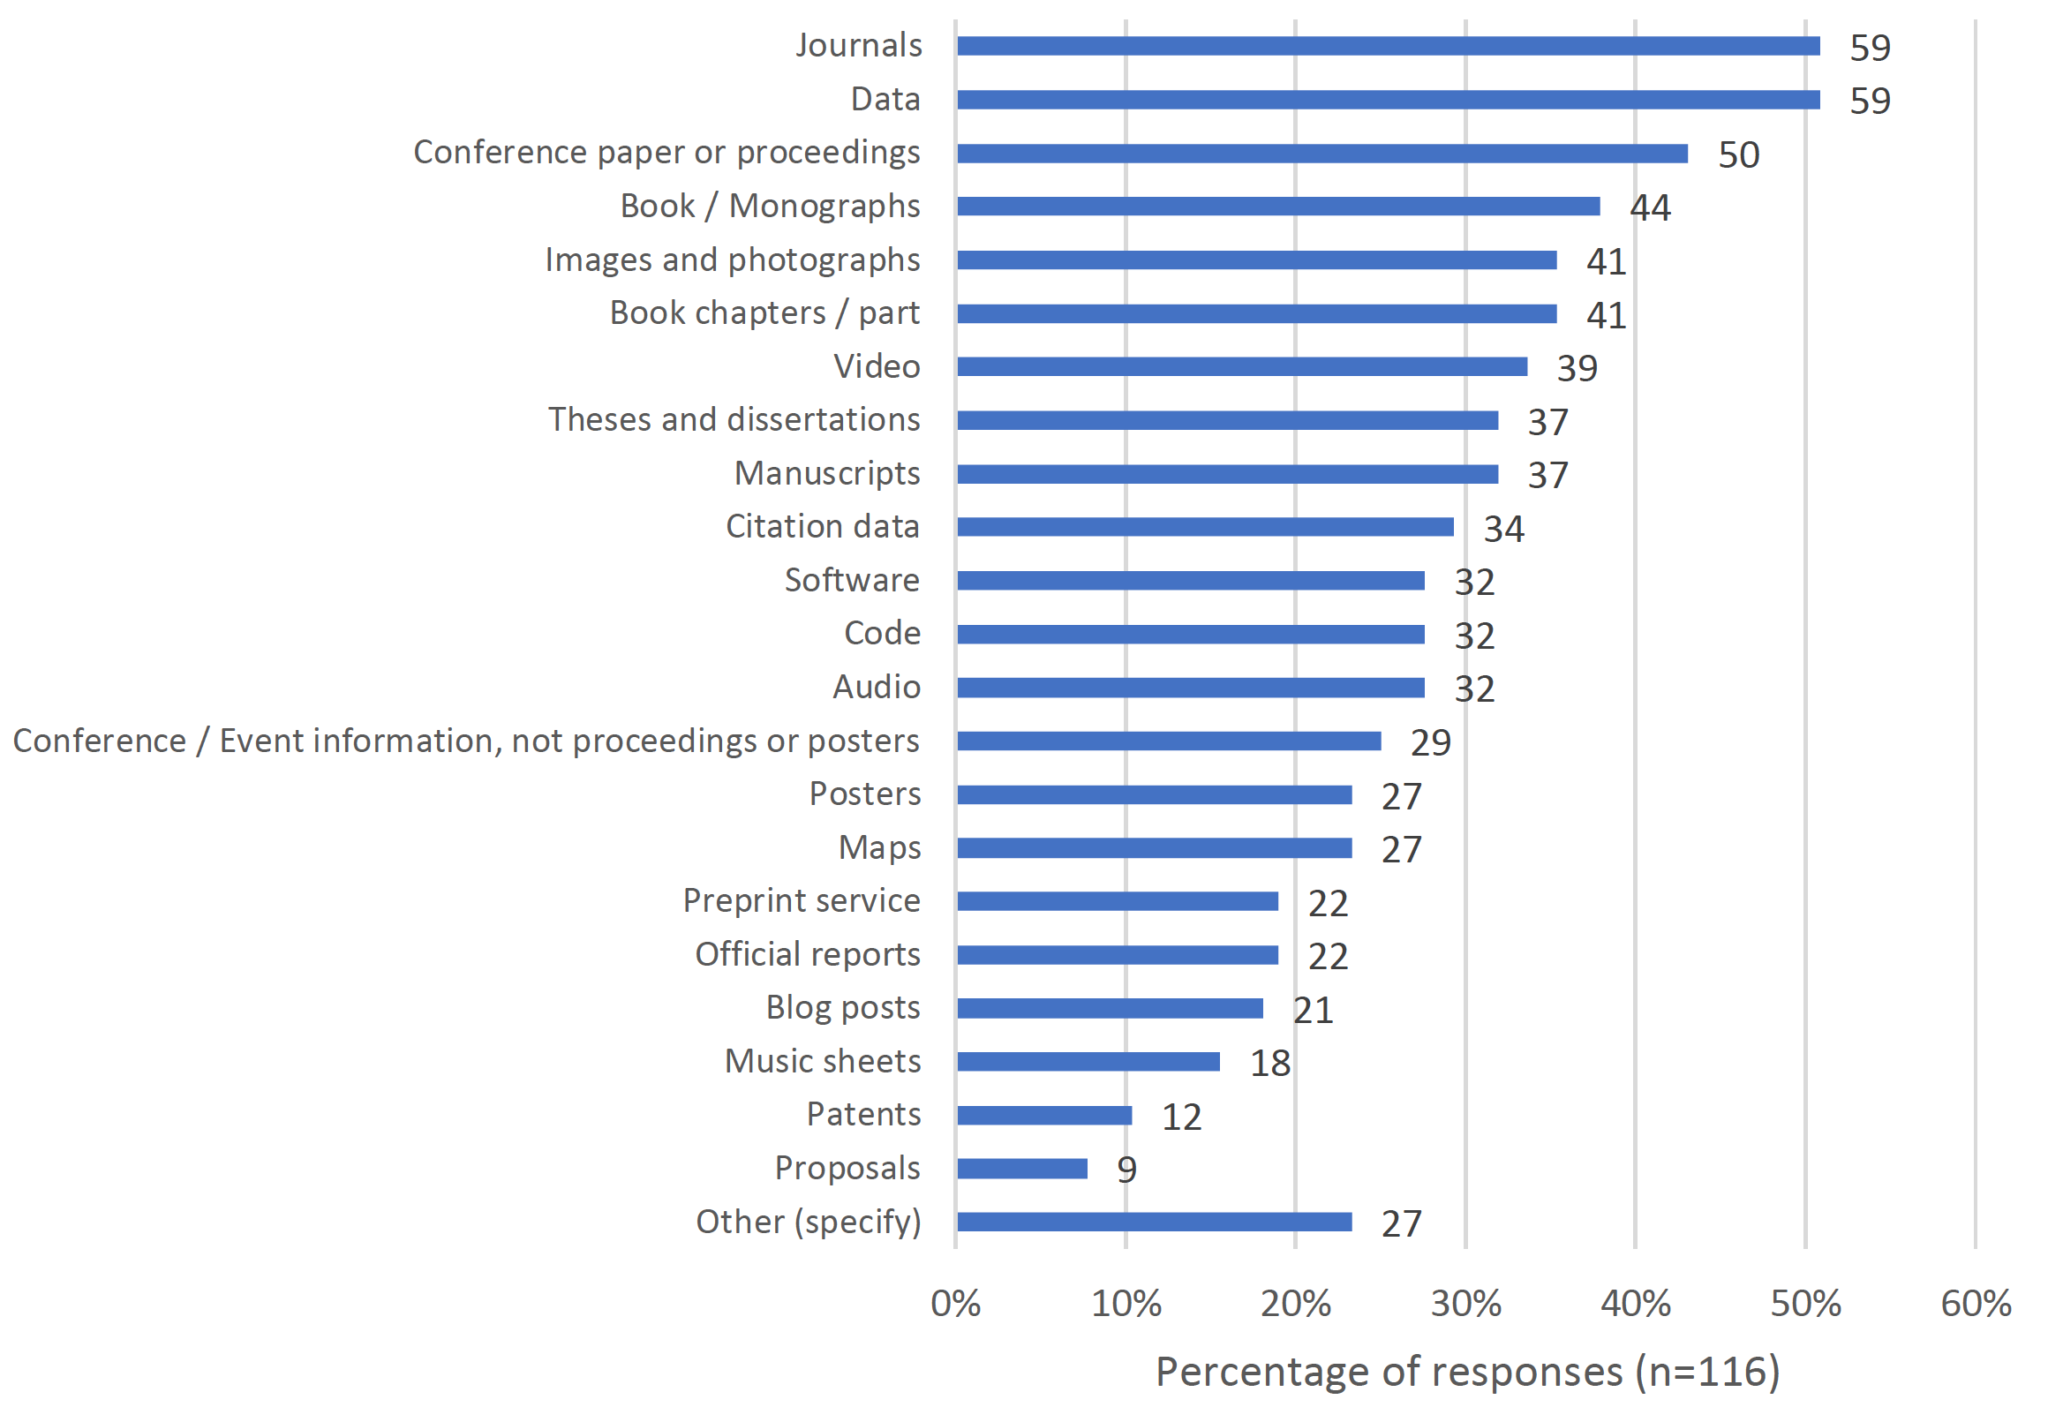 Types of content provided by the European Open Science Infrastructure.